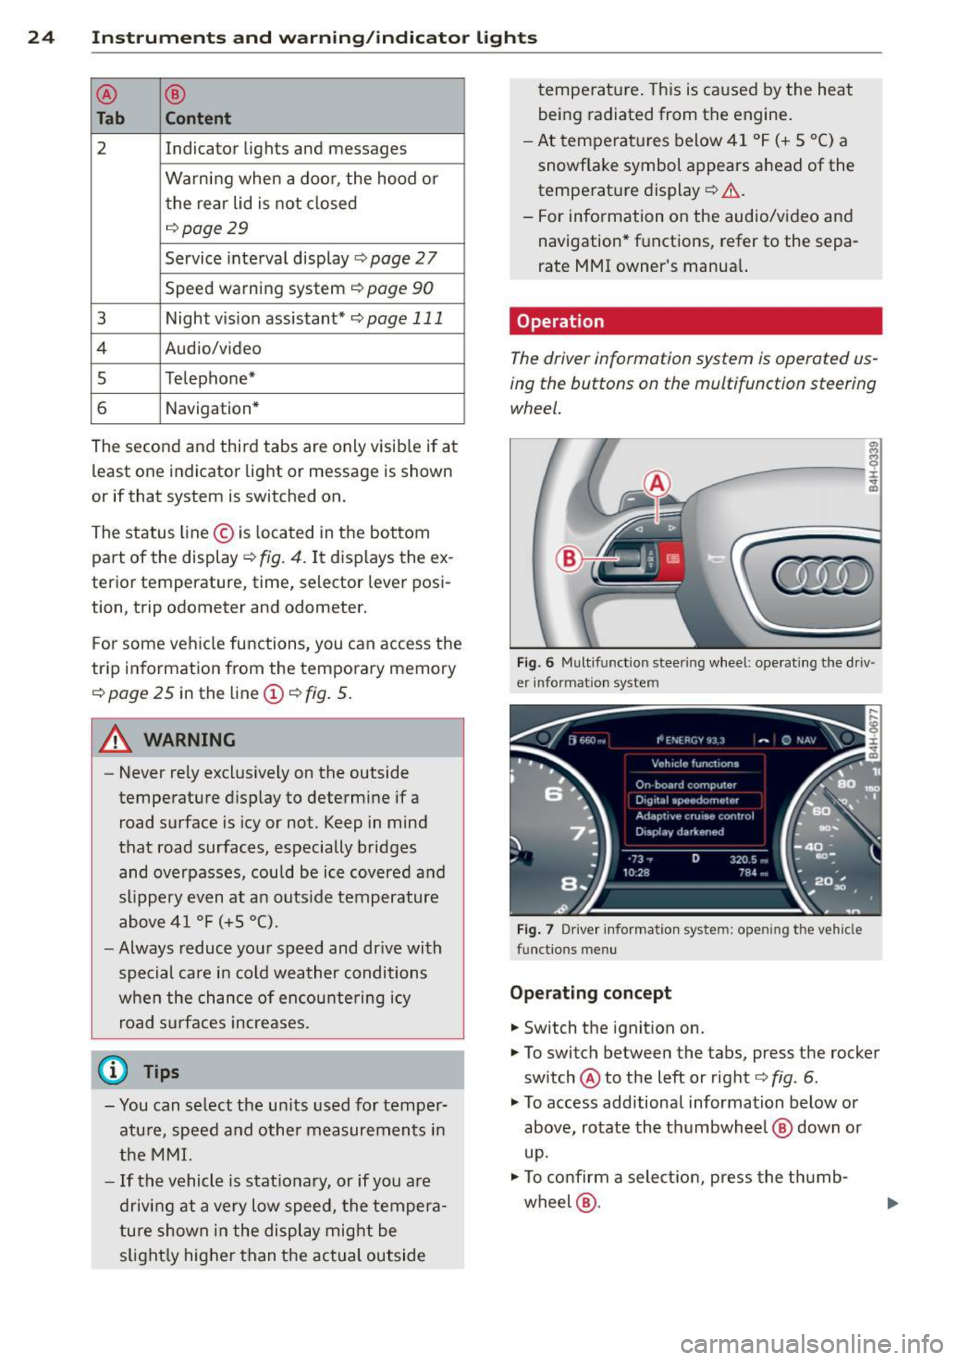 AUDI A8 2015  Owners Manual 24  Instruments  and  warning/indicator  lights 
® ® 
Tab  Content 
2 Indicator lights and  messages 
Warning  when  a  door,  the  hood  or  the  rear  lid is  not  closed 
c:::>page29 
Service  in